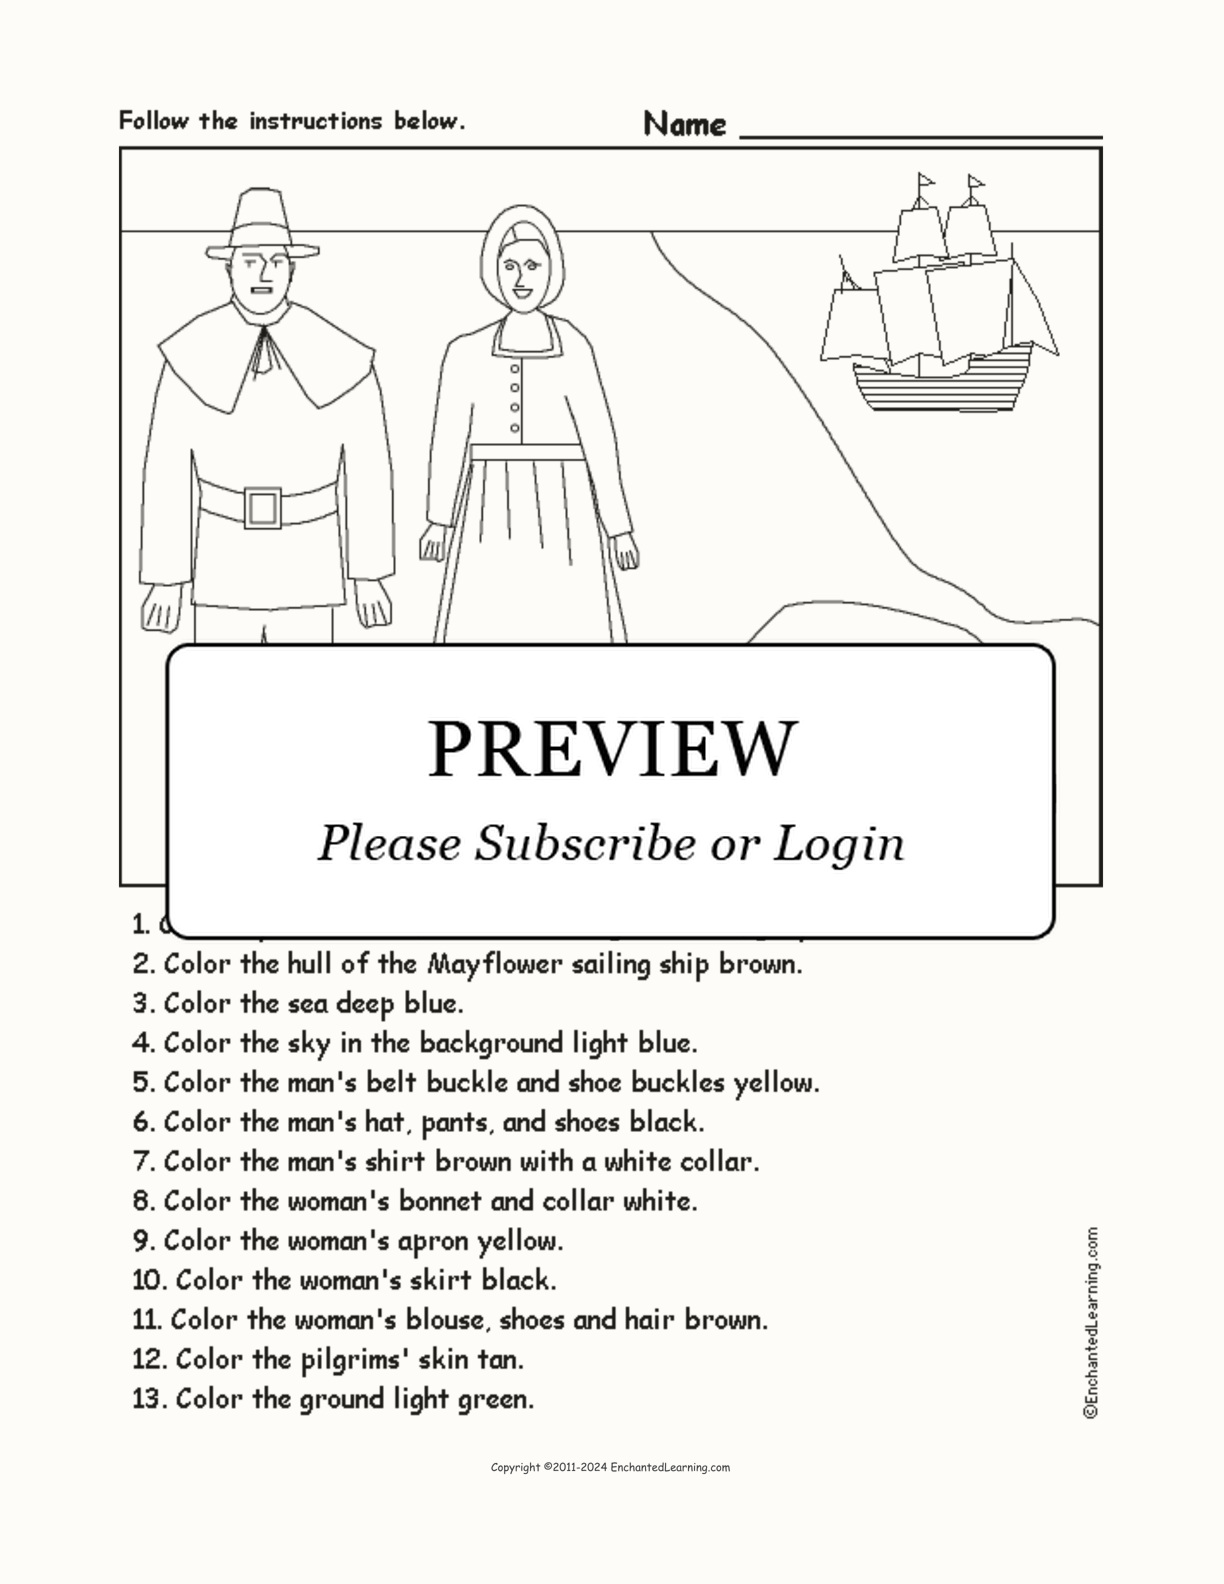 Pilgrims - Follow the Instructions interactive worksheet page 1